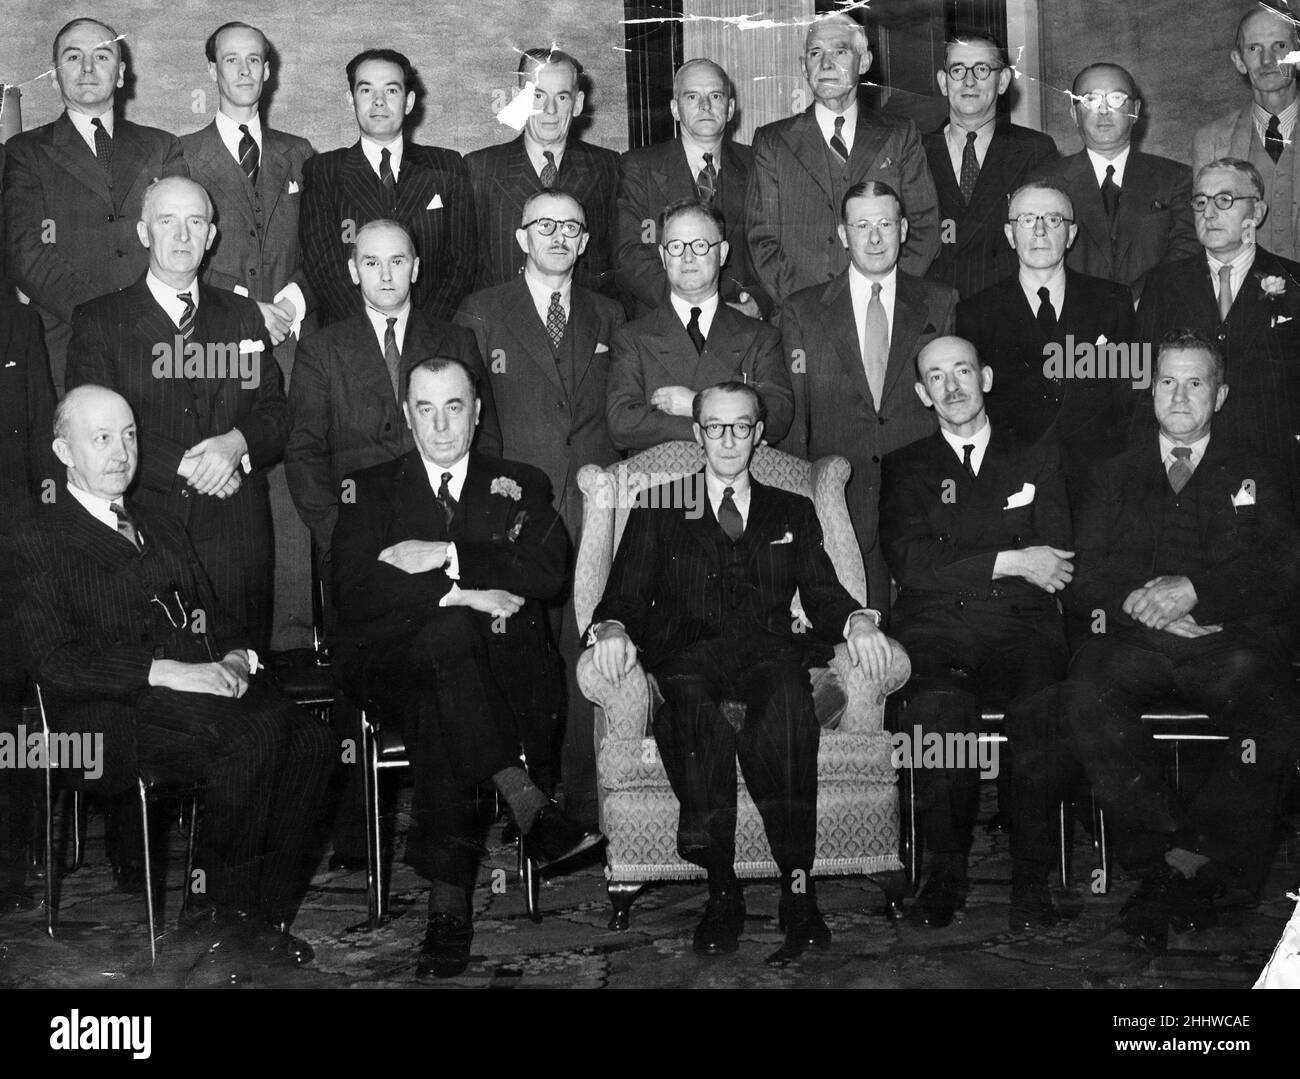 Ivor Mackenzie Thomas, who has retired from his position as manager of the Commercial Printing Department of the Western Mail and Echo Ltd, was entertained by executive officers of the company at a luncheon held at the Royal Hotel Cardiff, 24th July 1950. Our photo shows, left to right seated, Clarence Lewis, Sir Robert Webber, Ivor Mackenzie Thomas, Frank Webber, FB Lawton. Standing middle row, Edward James, David Prosser, WJ Dowling, V Perring, WO James, C Leonard, FJ Willing, DC Stephen, JH Rickard. Standing back row, H Baxendell, EO Carr, Hubert MacKenzie Thomas, R Harrison, W Hales, F Bir Stock Photo